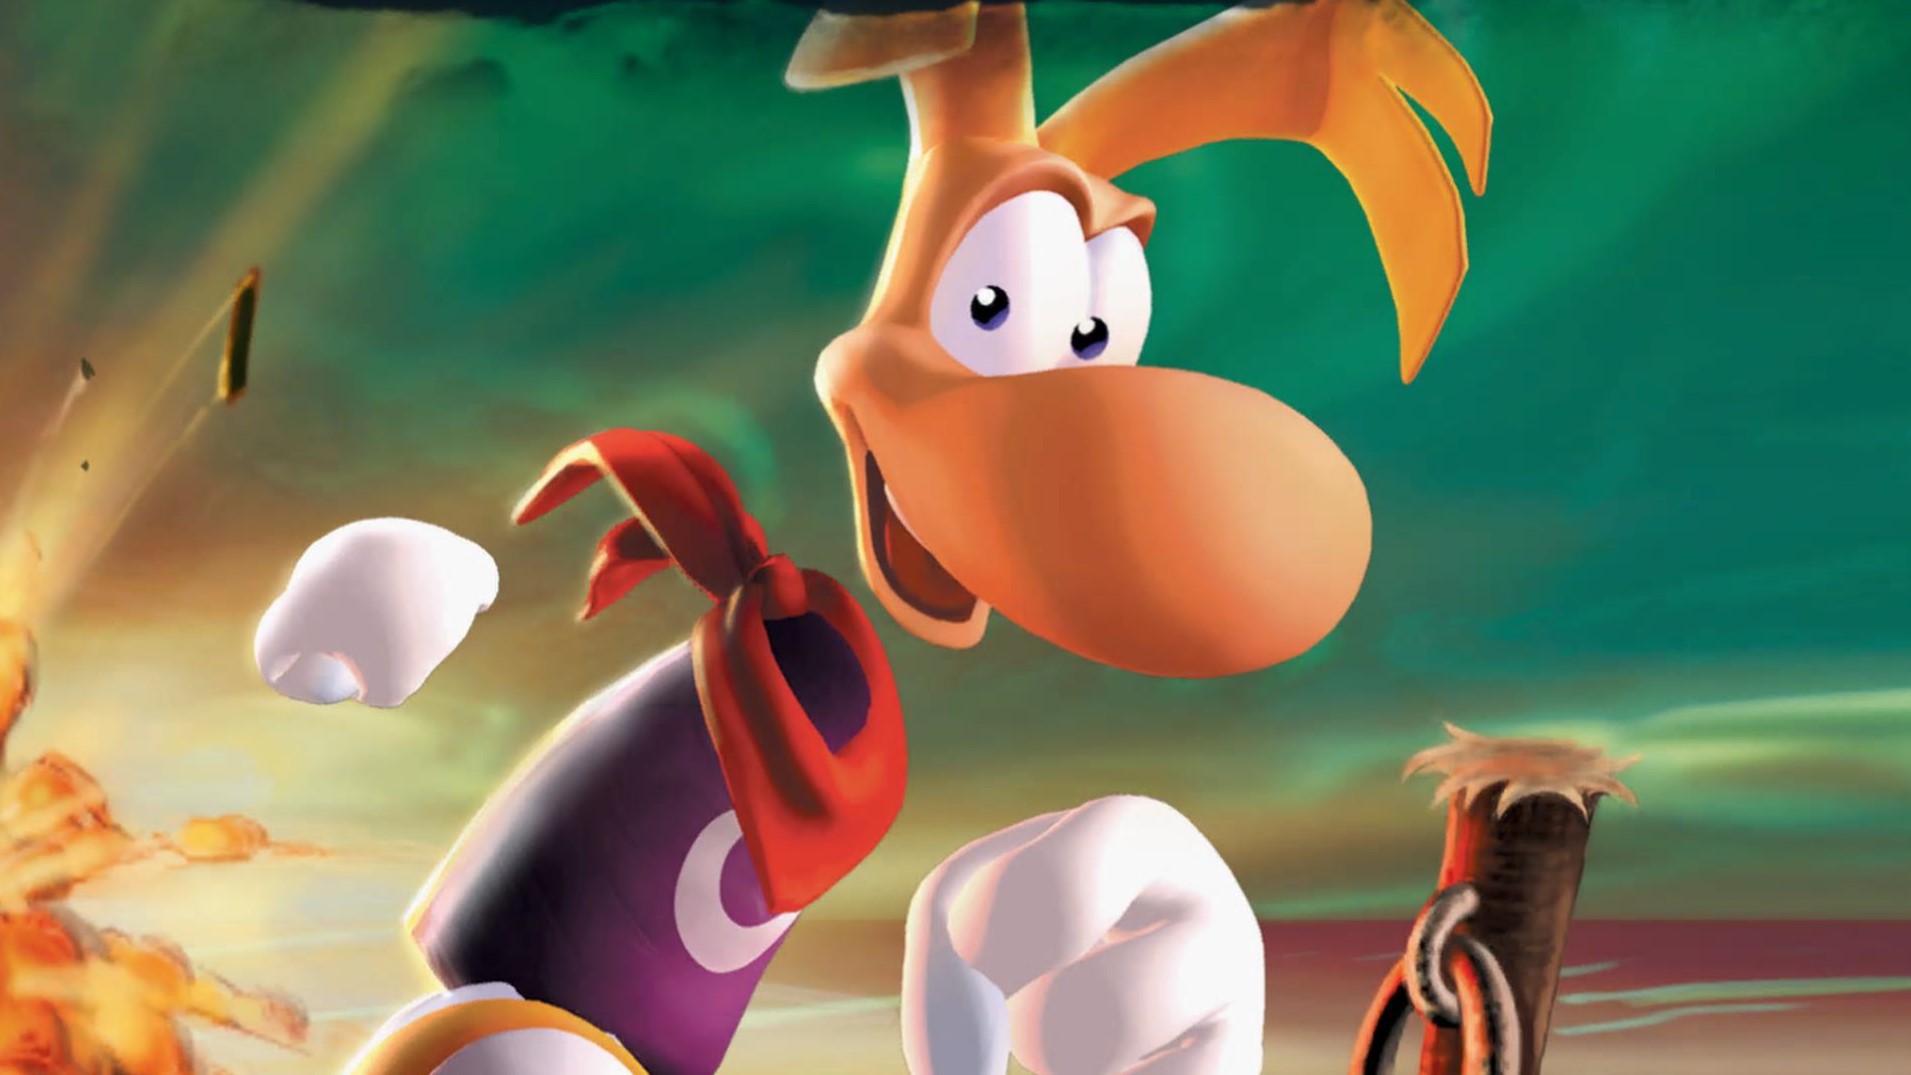 Key art of a Rayman game from Ubisoft.